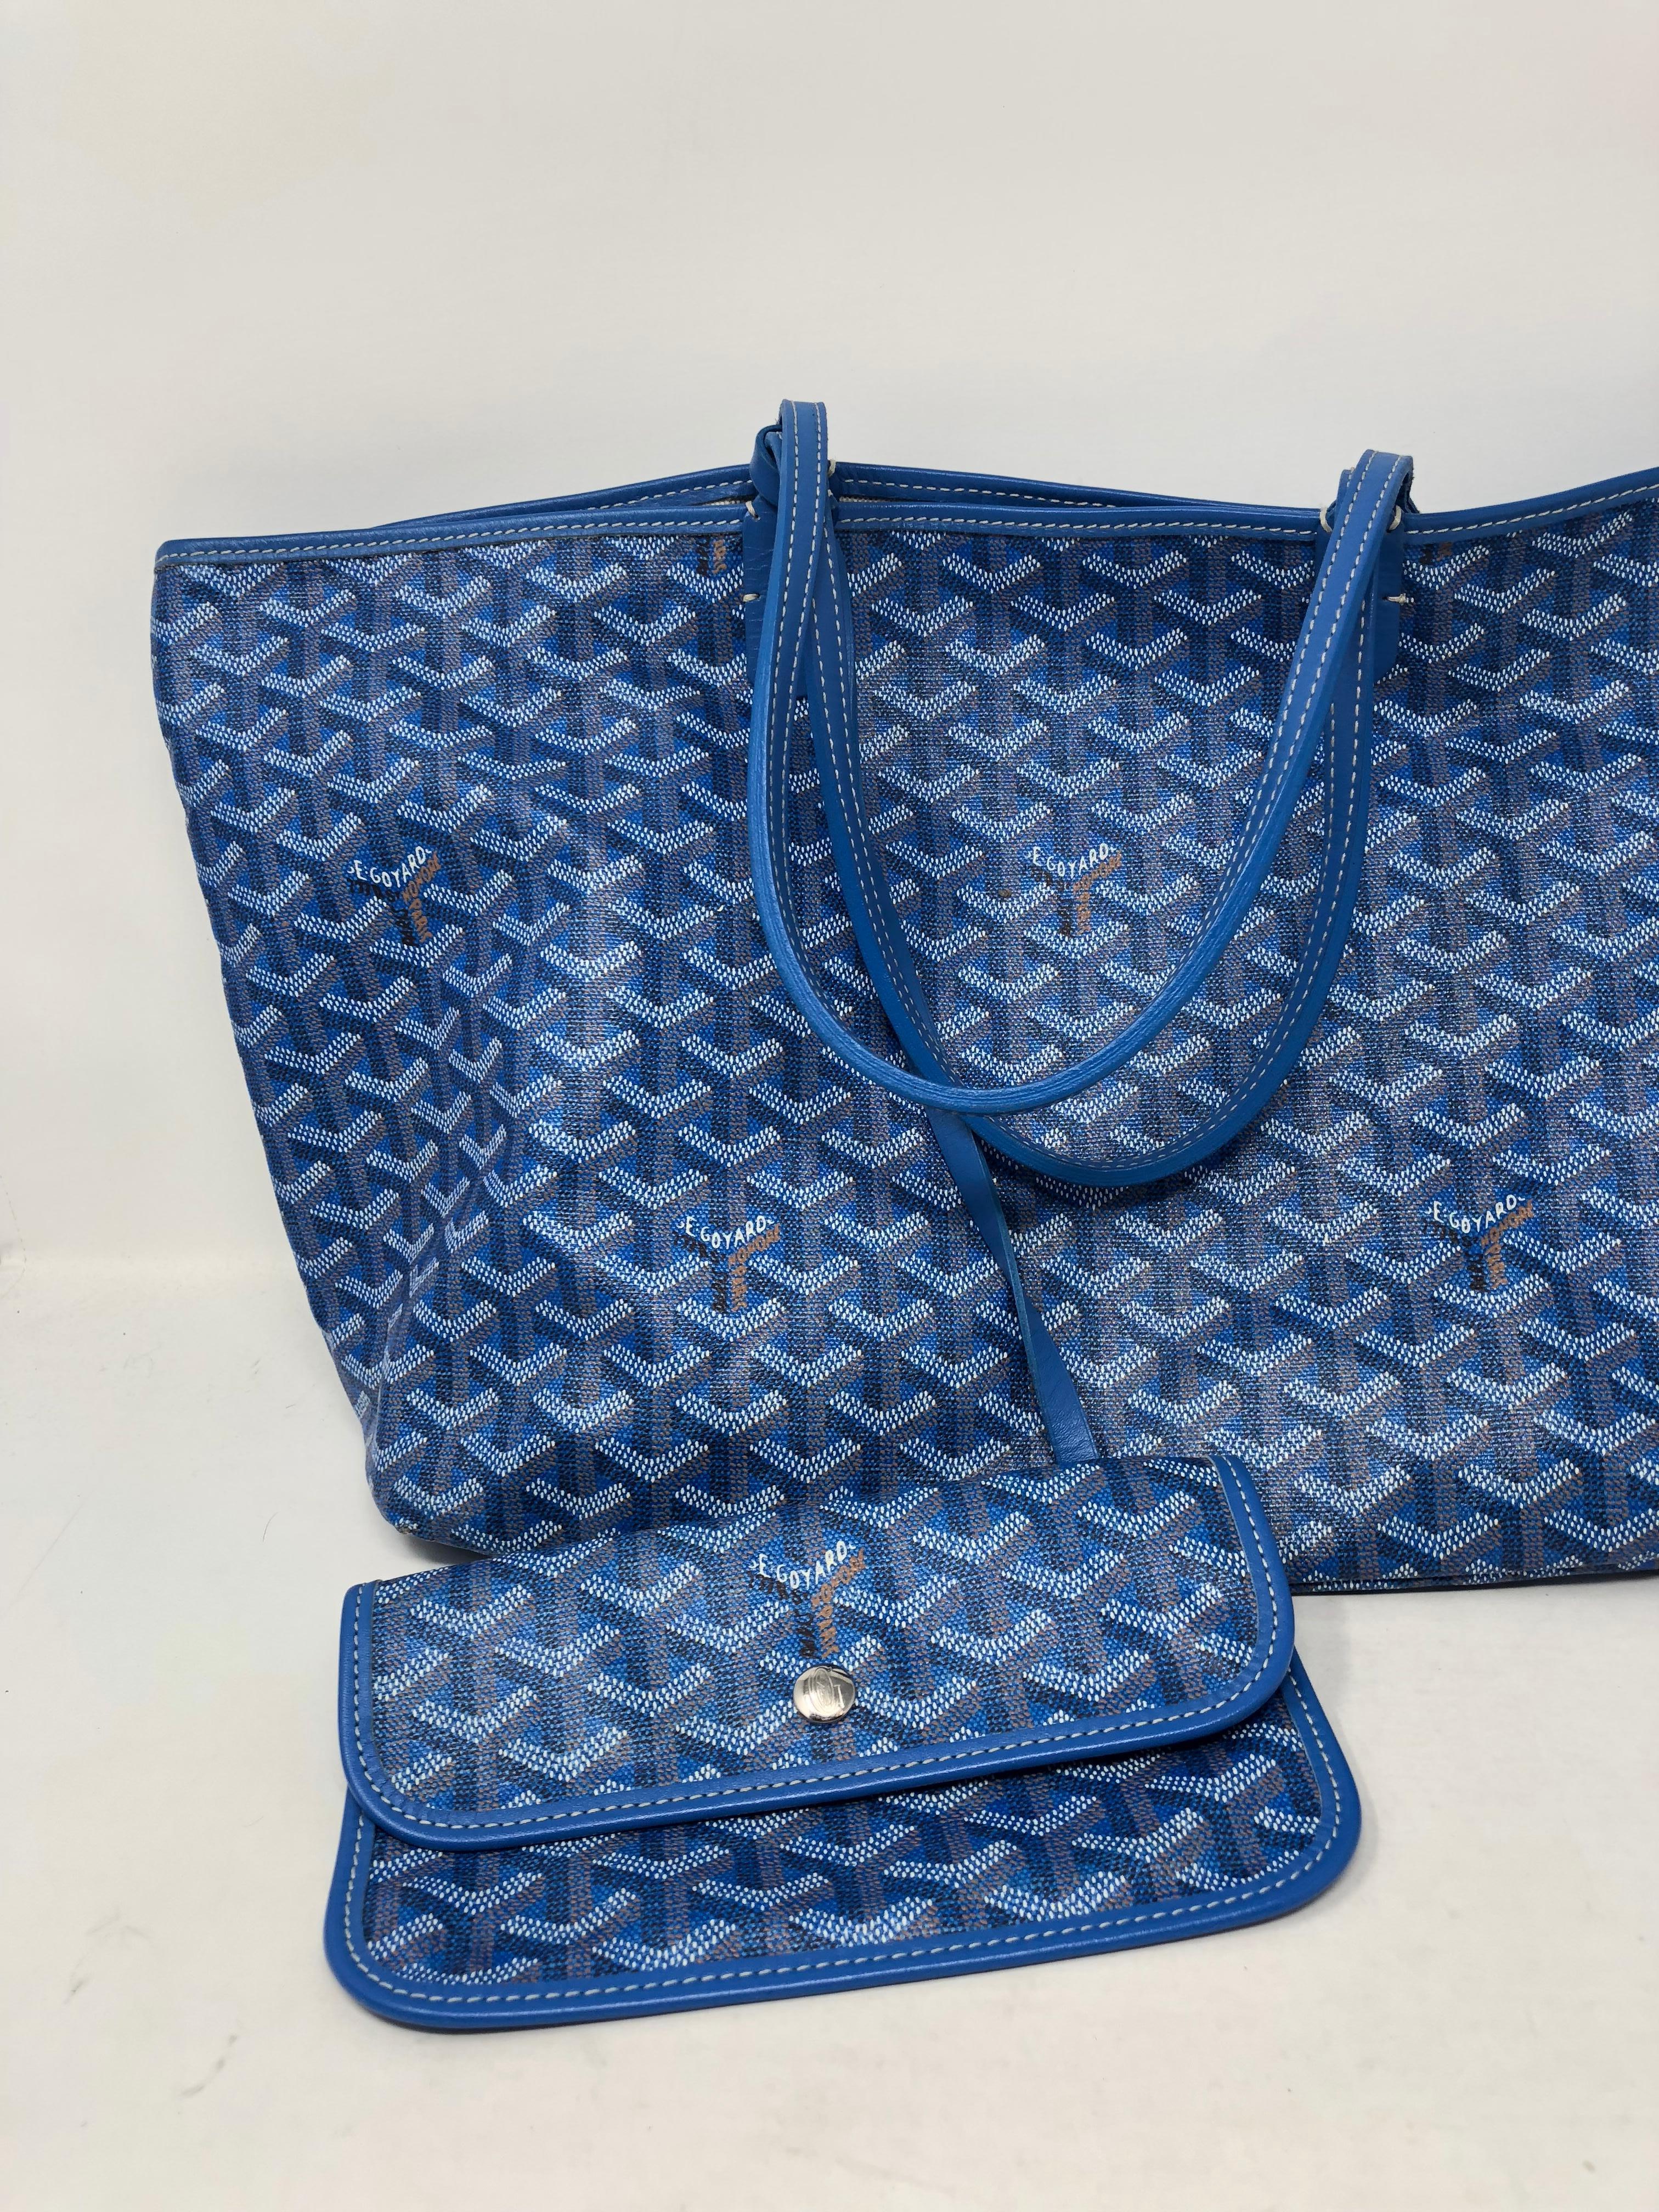 Goyard St. Louis Tote PM in rare sky blue color. Includes the pouch and in good condition. Most wanted tote bag. Goyard bags are a great investment. Guaranteed authentic. 